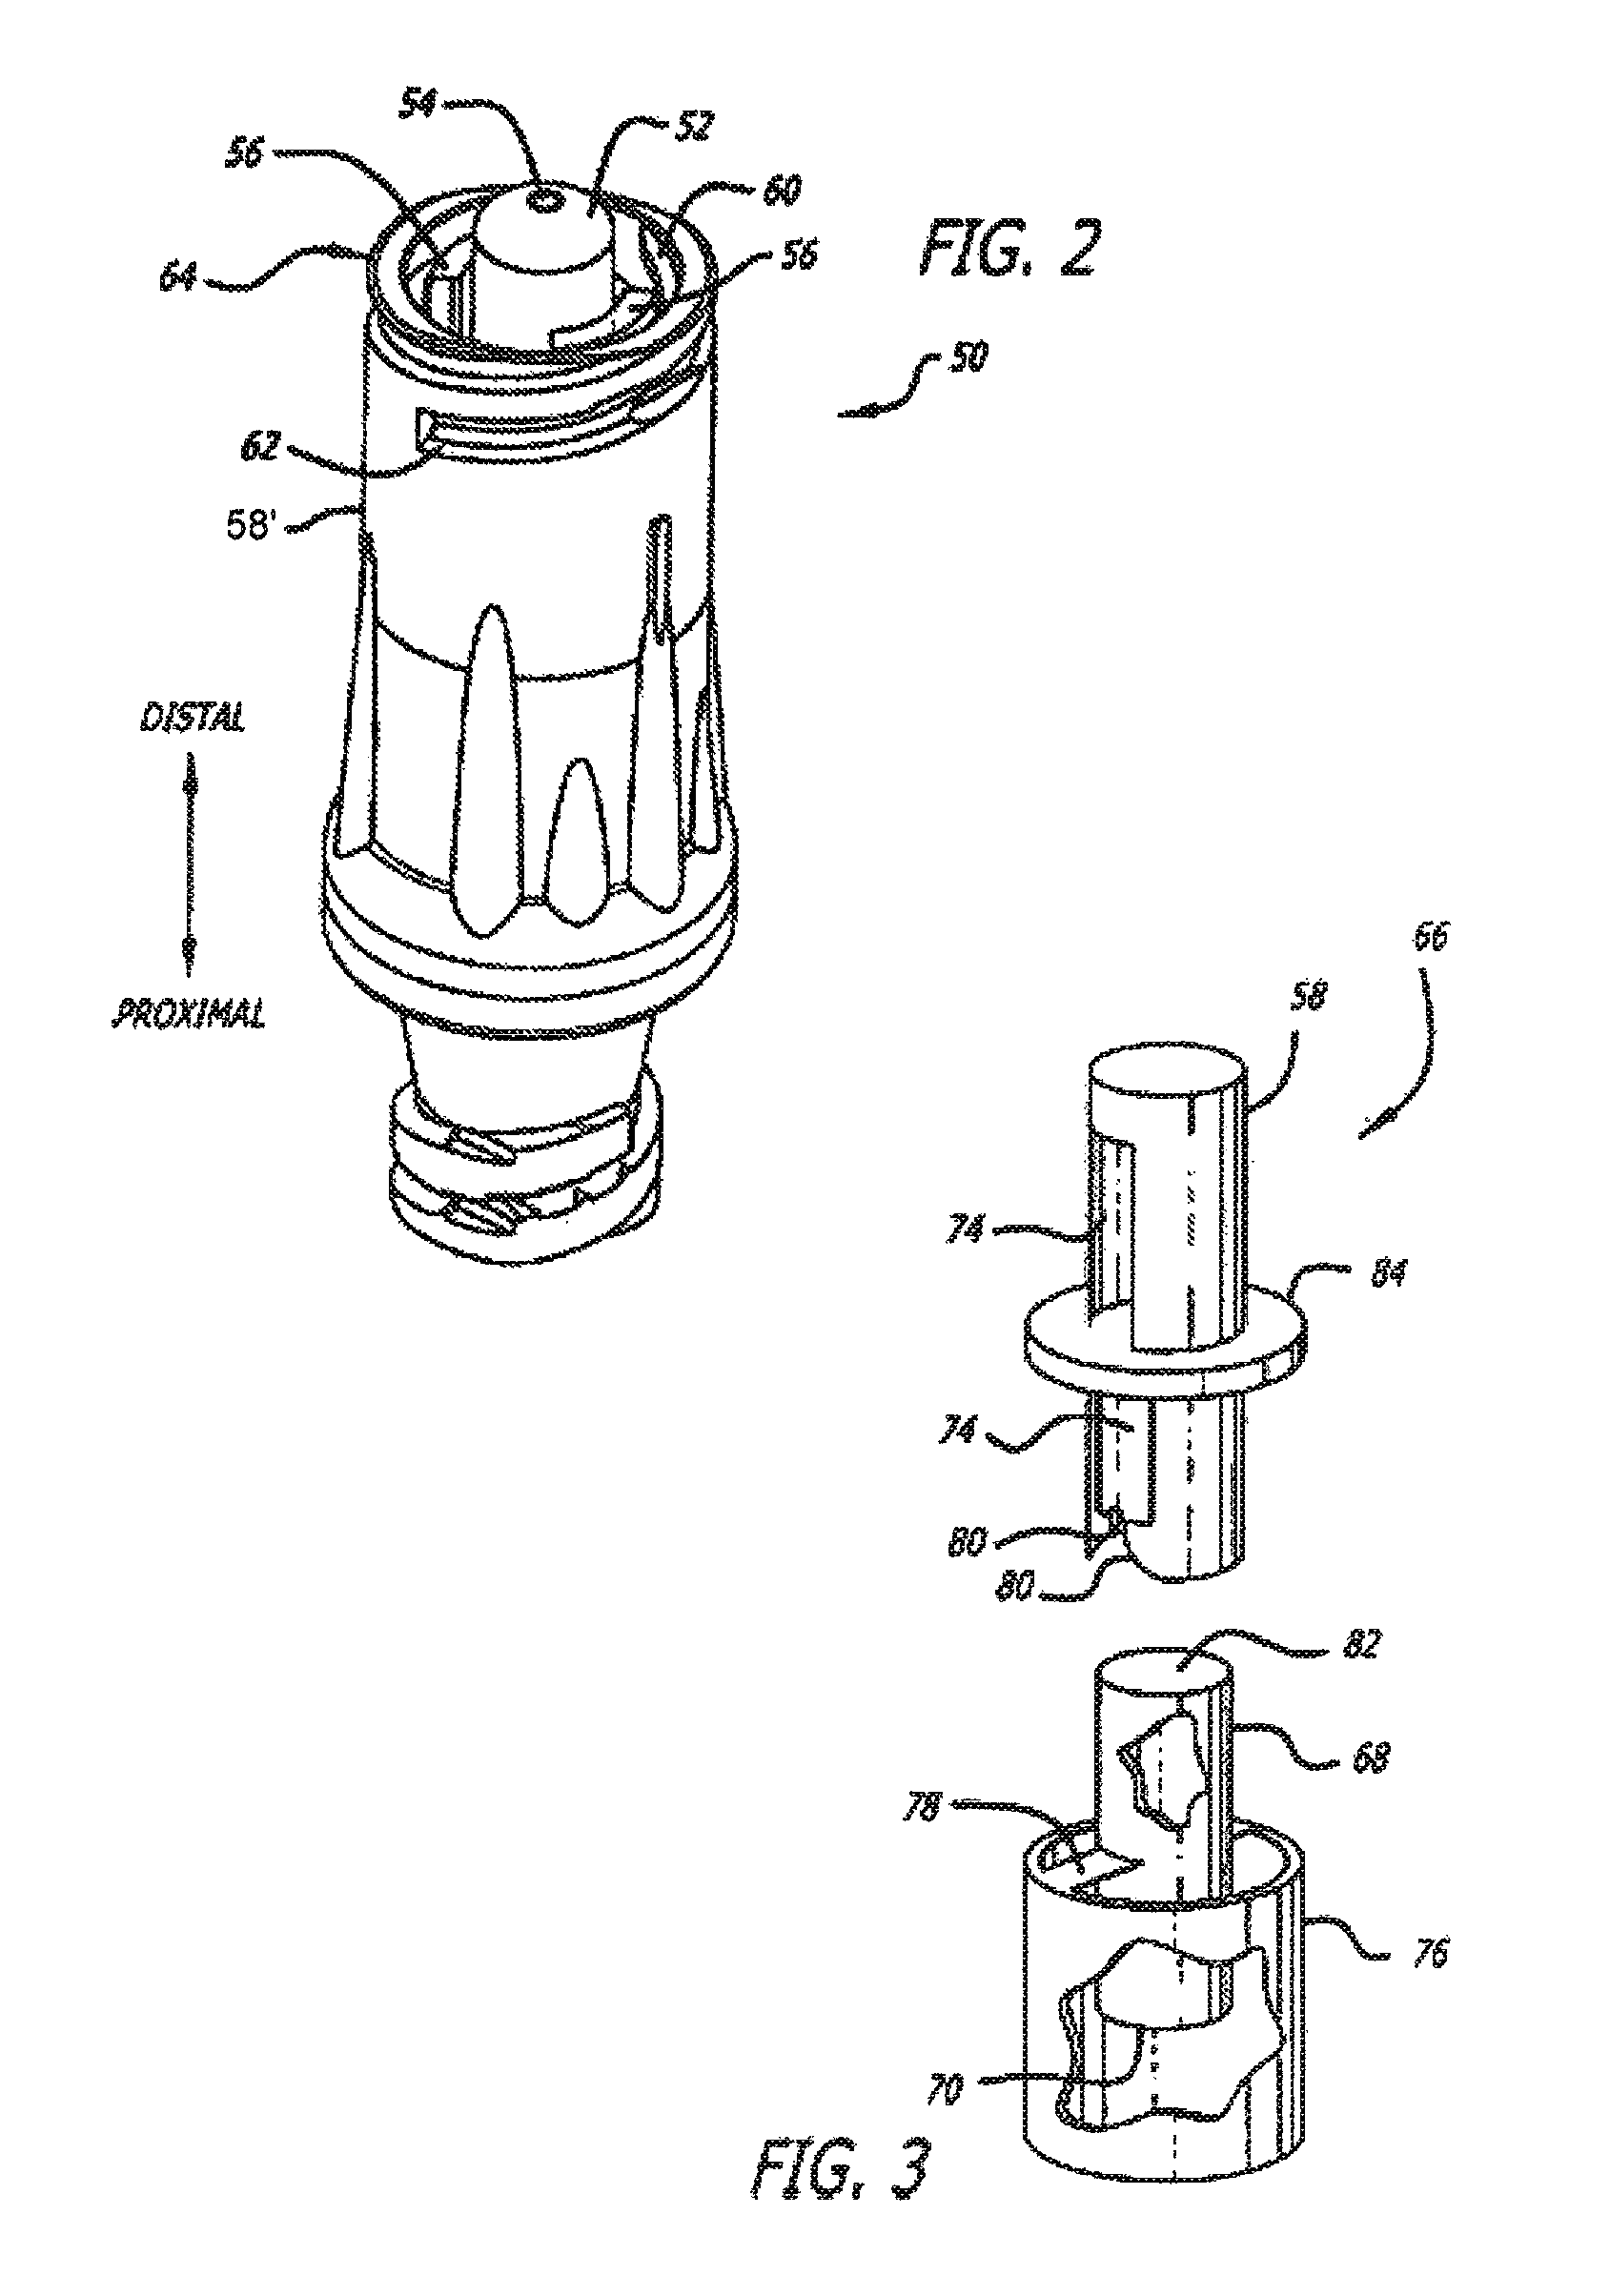 Protective priming cap for self-sealing male Luer valve